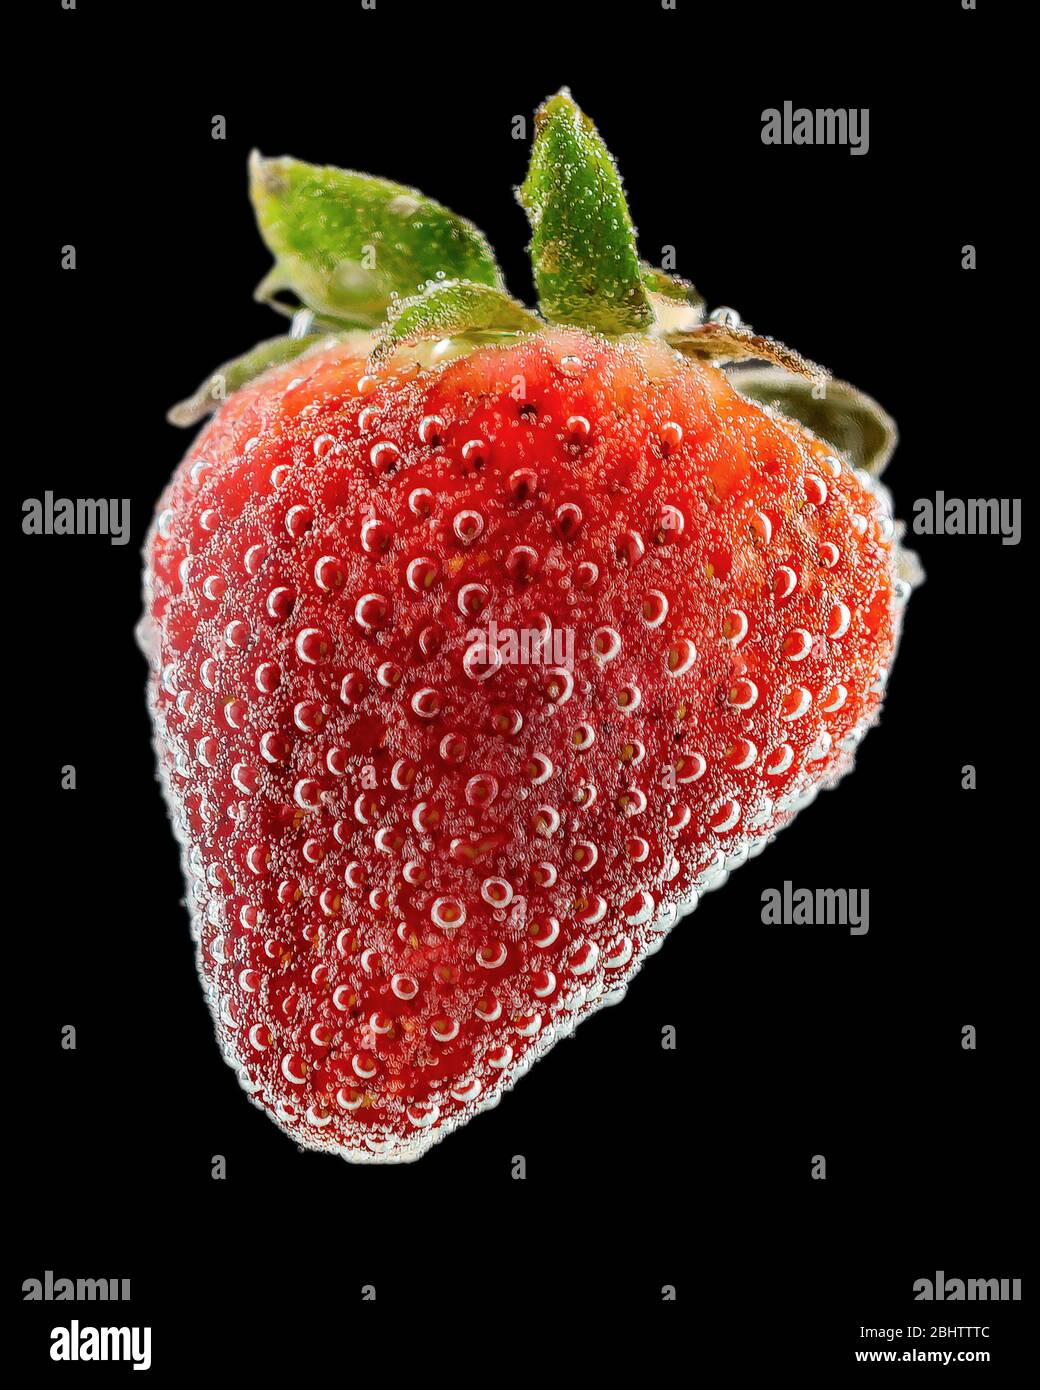 A ripe red strawberry submerged in a clear liquid with lots of bubbles.  Cut out on solid black background. Stock Photo